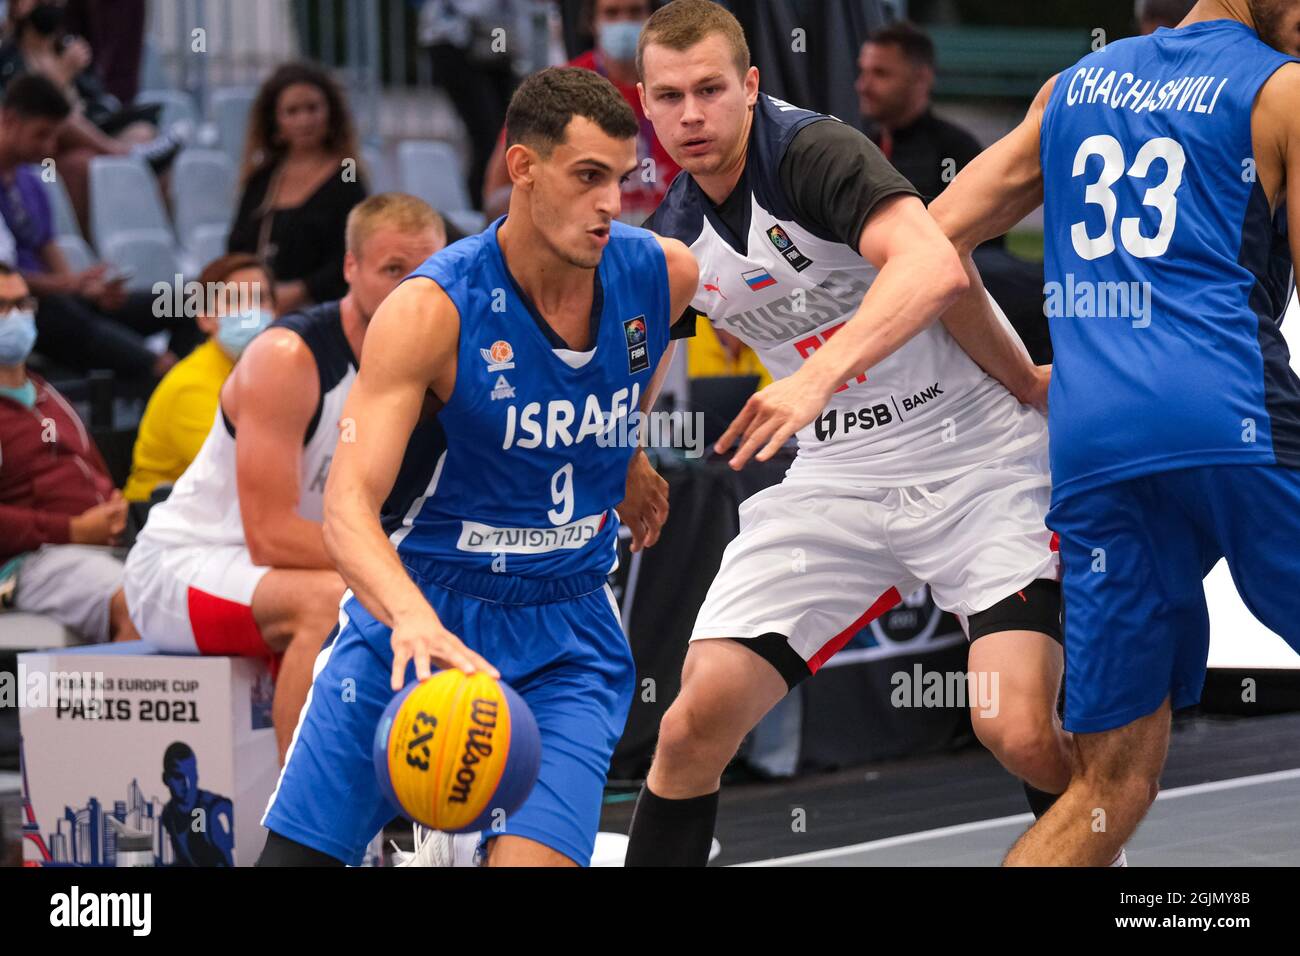 Paris, Paris, France, September 10, 2021, Guy Palatin (Israel) in action  during FIBA 3x3 Europe Cup 2021 (1st day) - Basketball EuroCup Championship  Stock Photo - Alamy